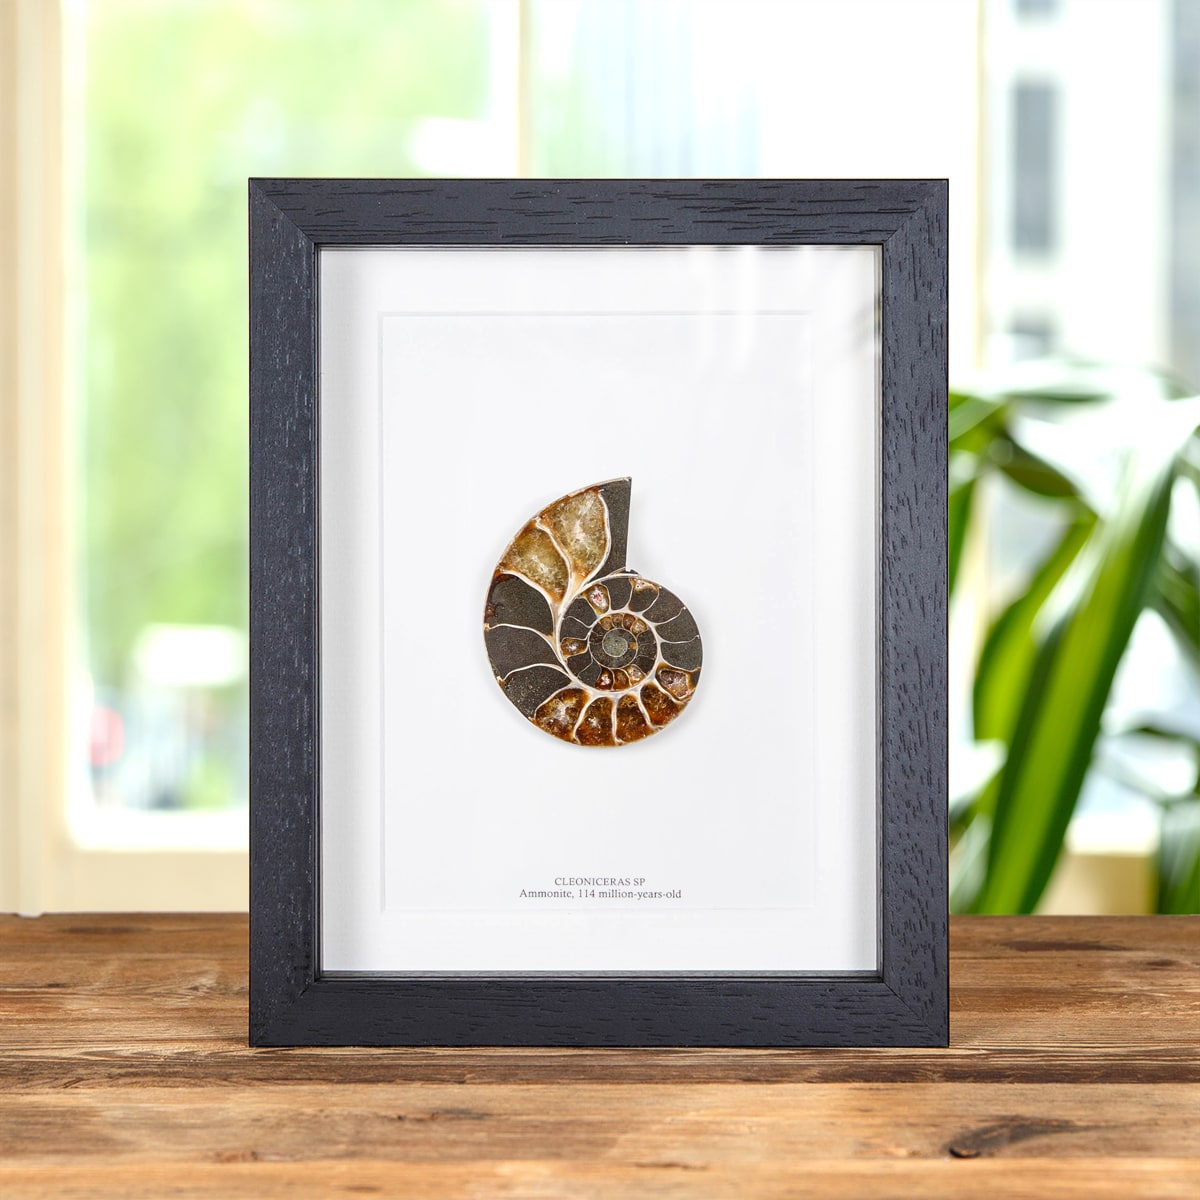 Minibeast Ammonite Cut and Polished Fossil in Box Frame (Cleoniceras sp)